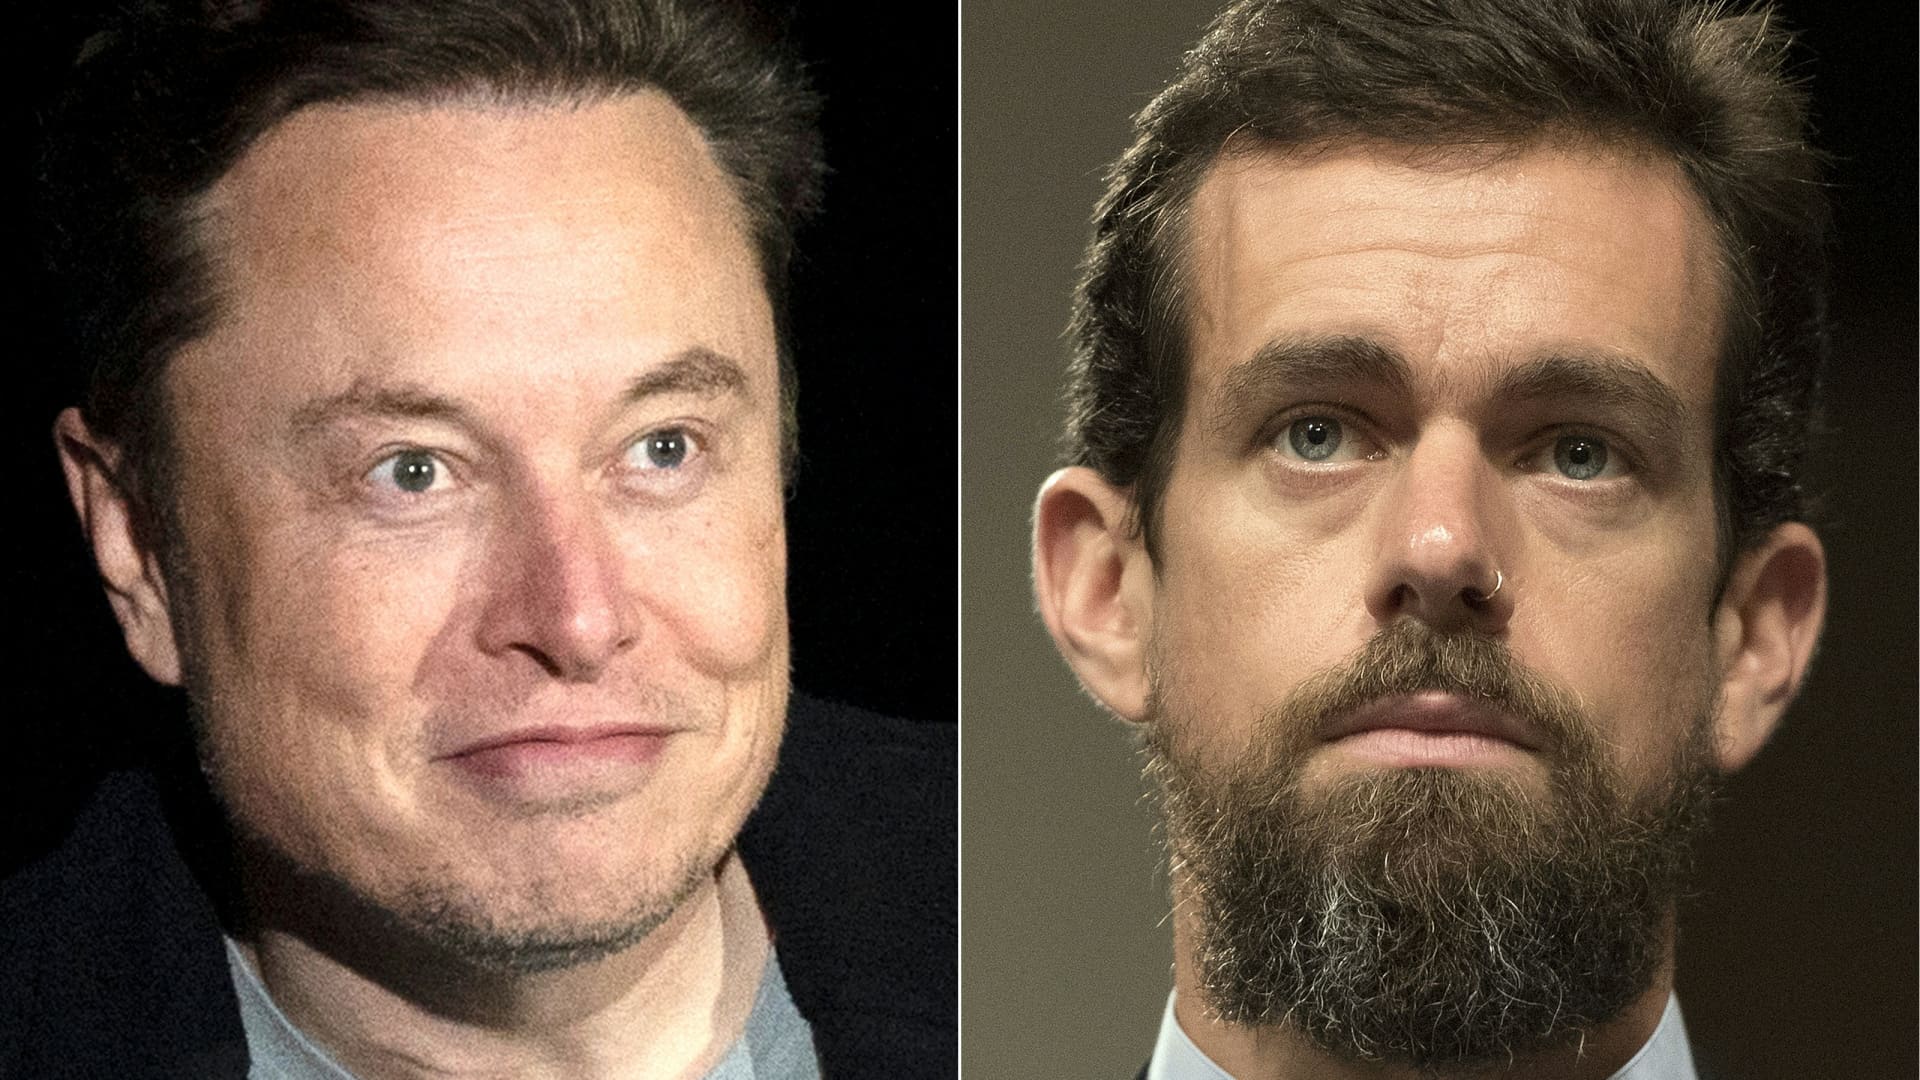 Jack Dorsey tried to get Elon Musk on Twitter’s board but directors were too ‘risk averse,’ texts reveal